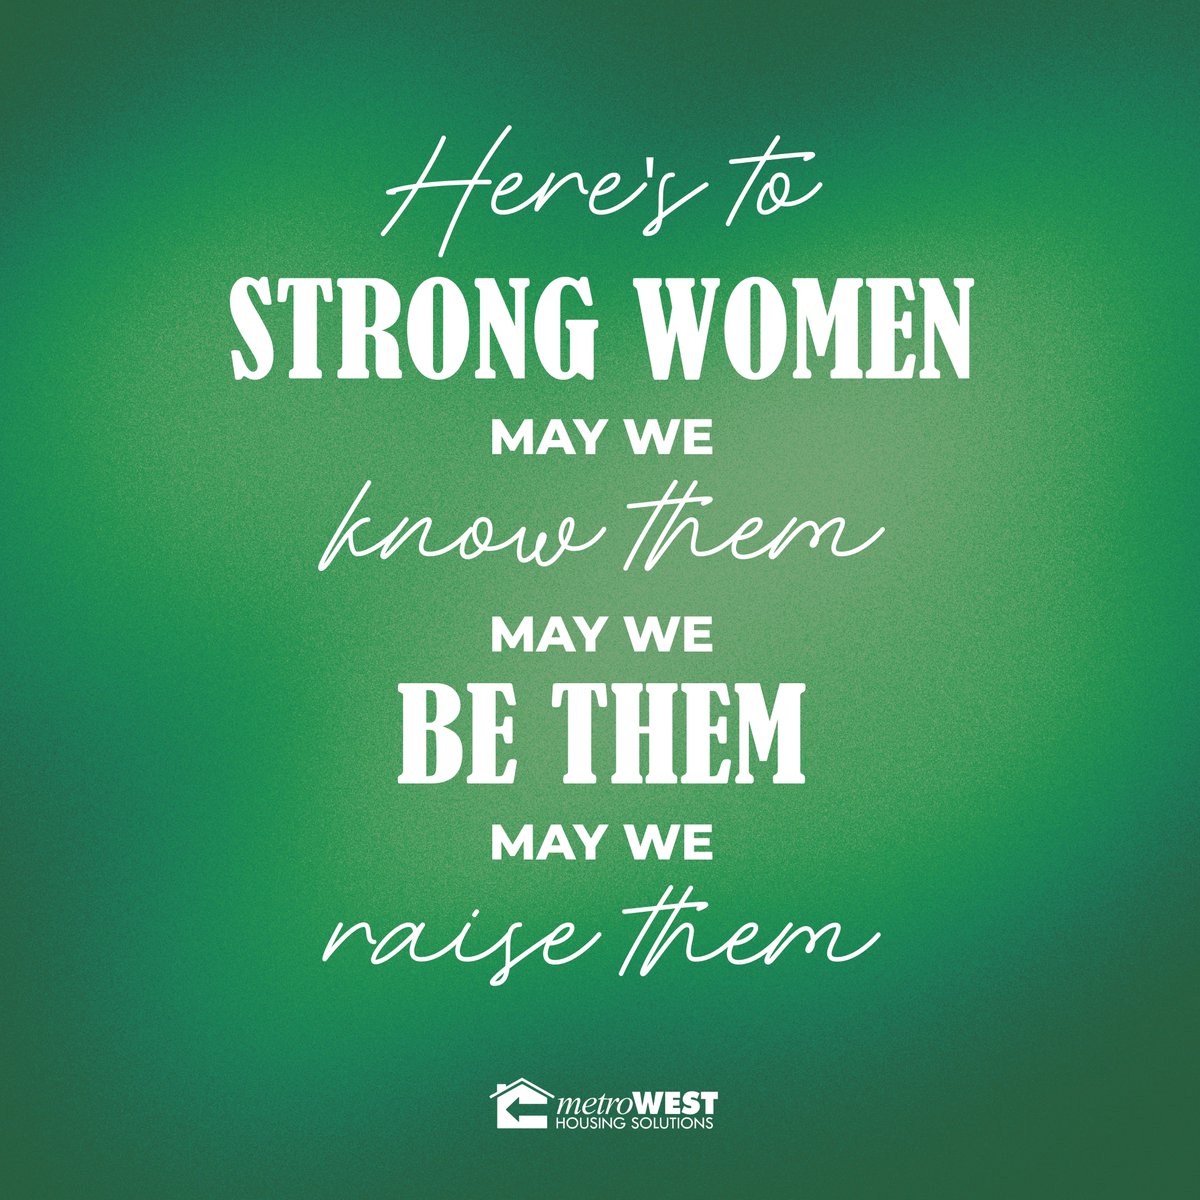 Today we celebrate the women in our community. Happy Women's History Month! #buildingcommunity #strongcommunities